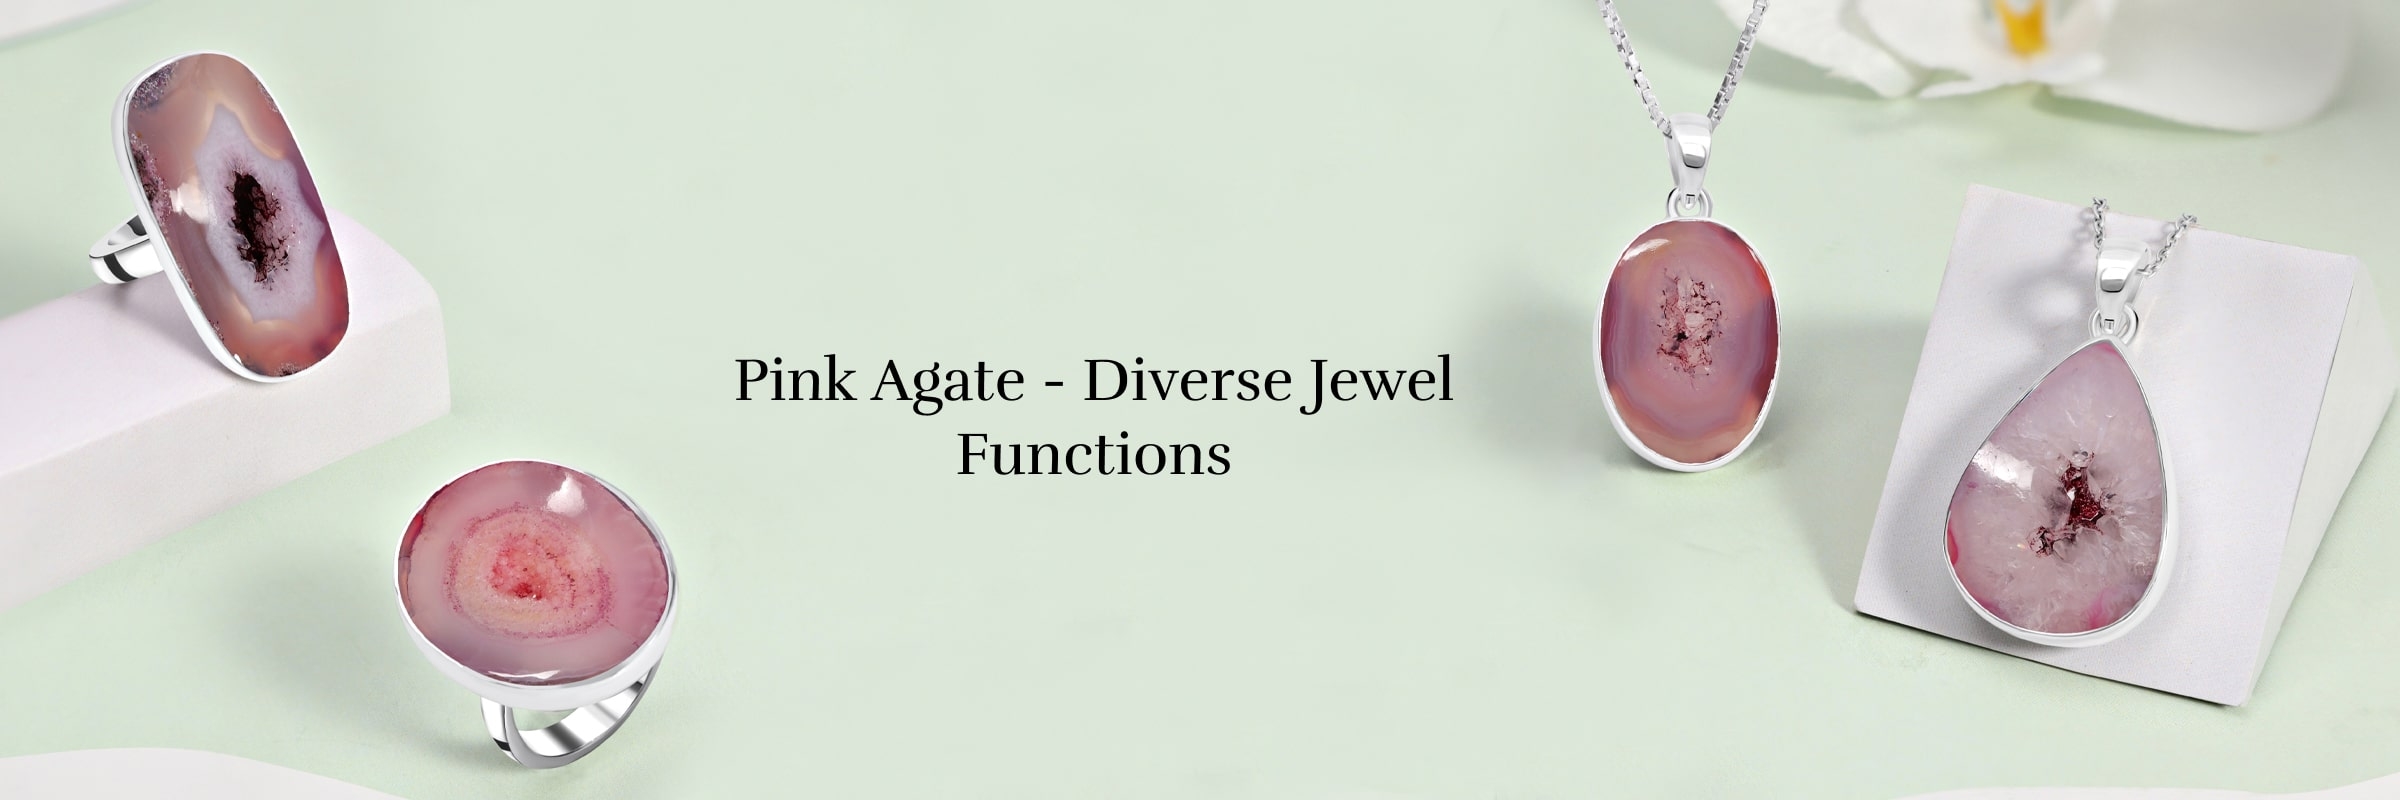 Uses of Pink Agate Jewel